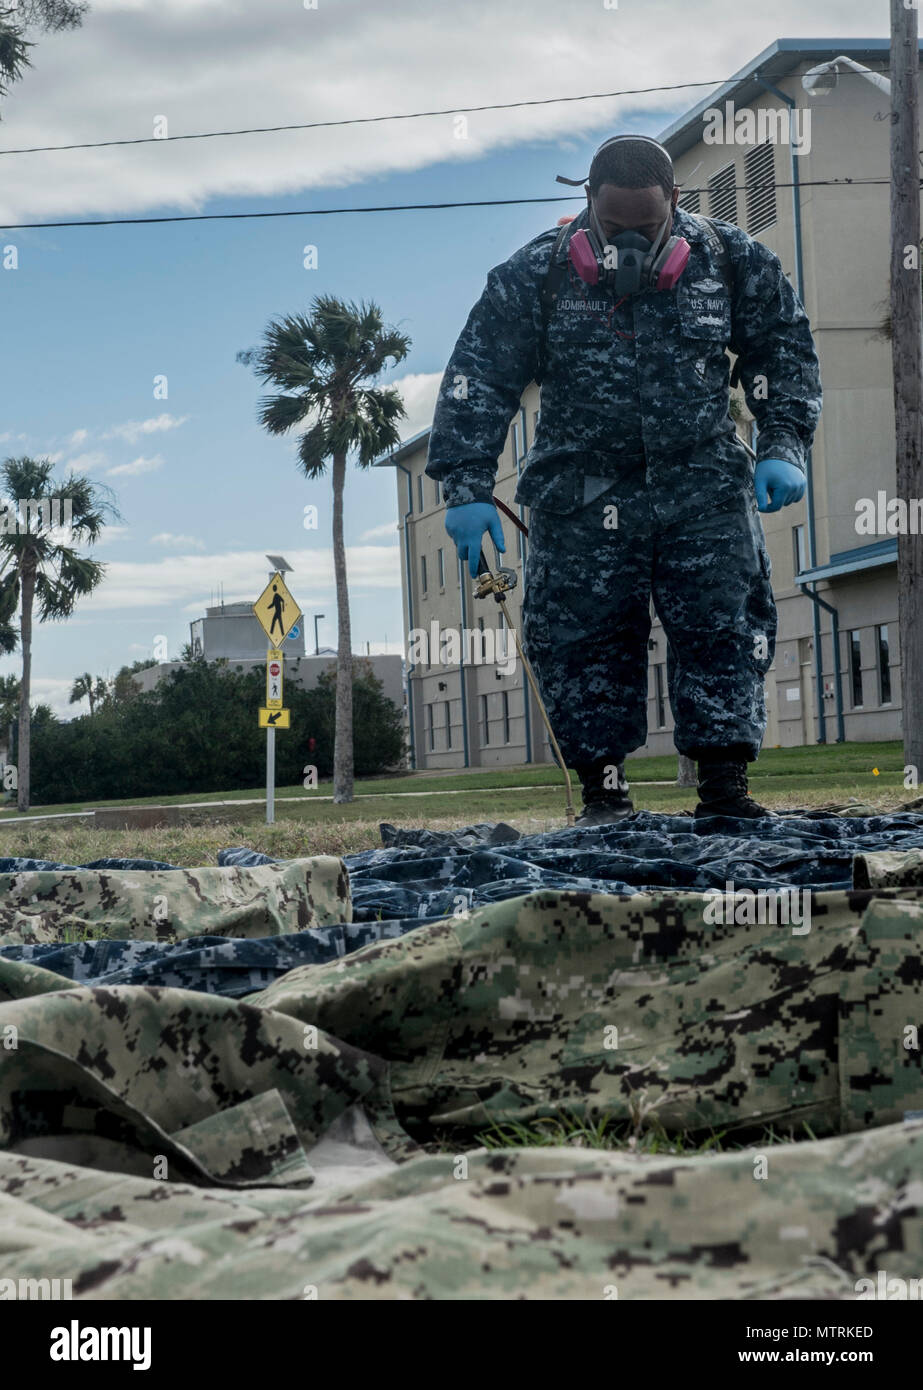 170123-WZ792-033 (Jan. 23, 2017) MAYPORT, Fla. - Hospital Corpsman 1st Class Dominic L'Admirault of Navy Entomology Center of Excellence (NECE) Jacksonville, Fla., applies the insect repellant Permethrin to uniforms at Naval Station Mayport, Fla. Treating uniforms is one of many preparations service members are taking before departing on Continuing Promise 2017 (CP-17). Continuing Promise 2017 is a U.S. Southern Command-sponsored and U.S. Naval Forces Southern Command/U.S. 4th Fleet-conducted deployment to conduct civil-military operations including humanitarian assistance, training engagement Stock Photo